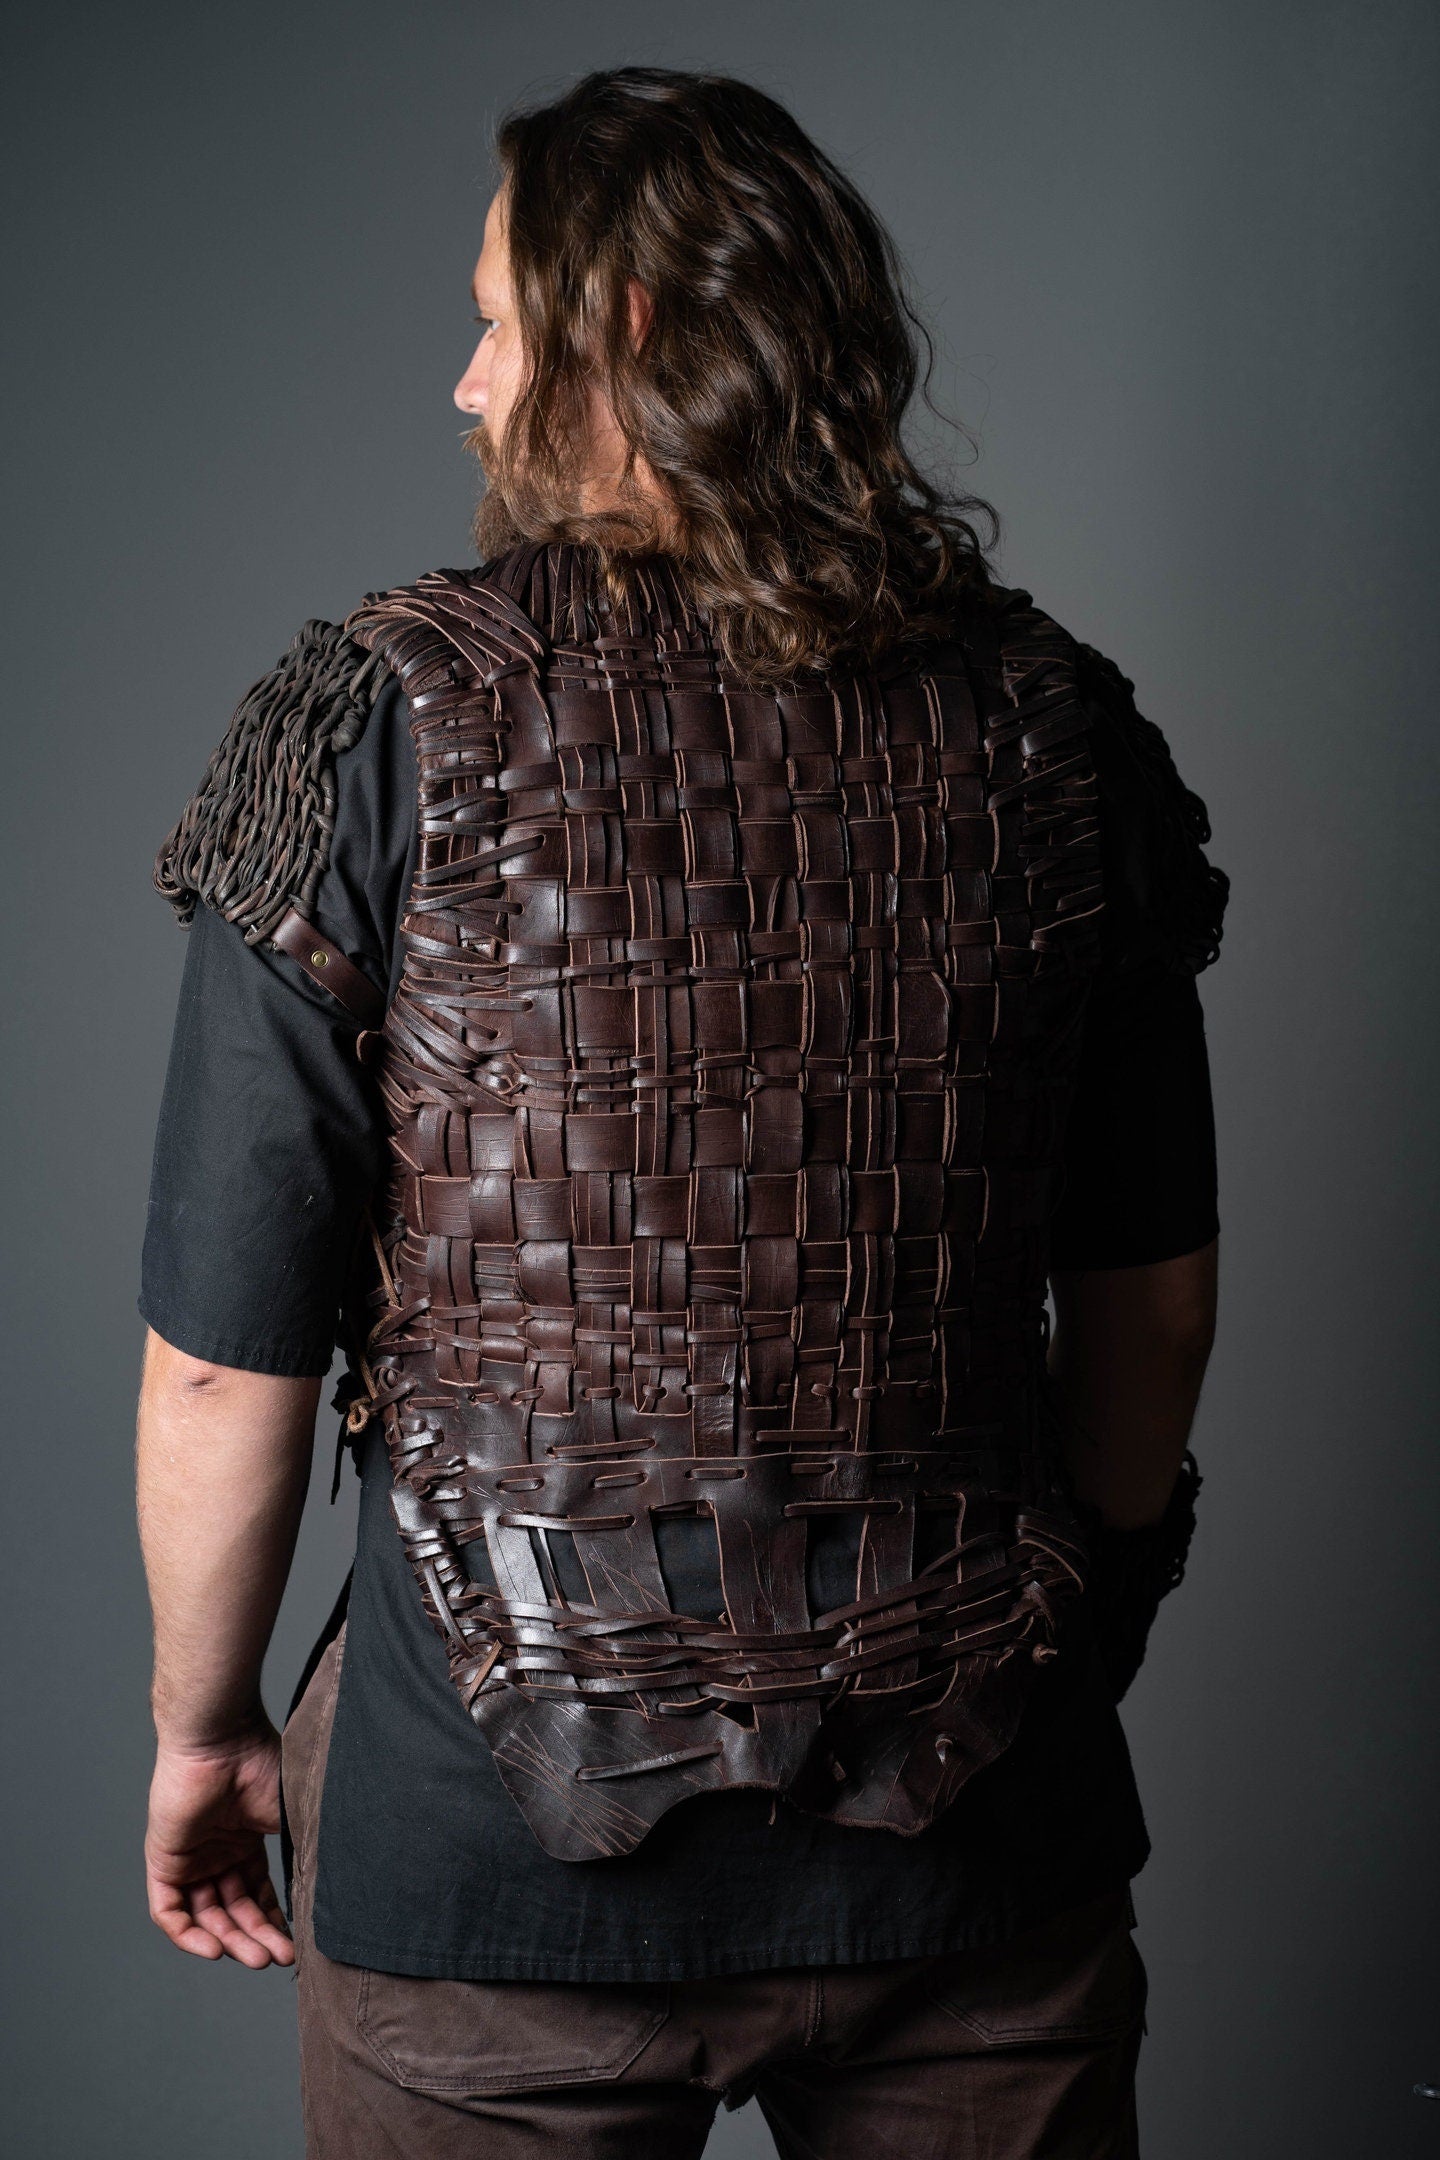 Viking armor with brass accents